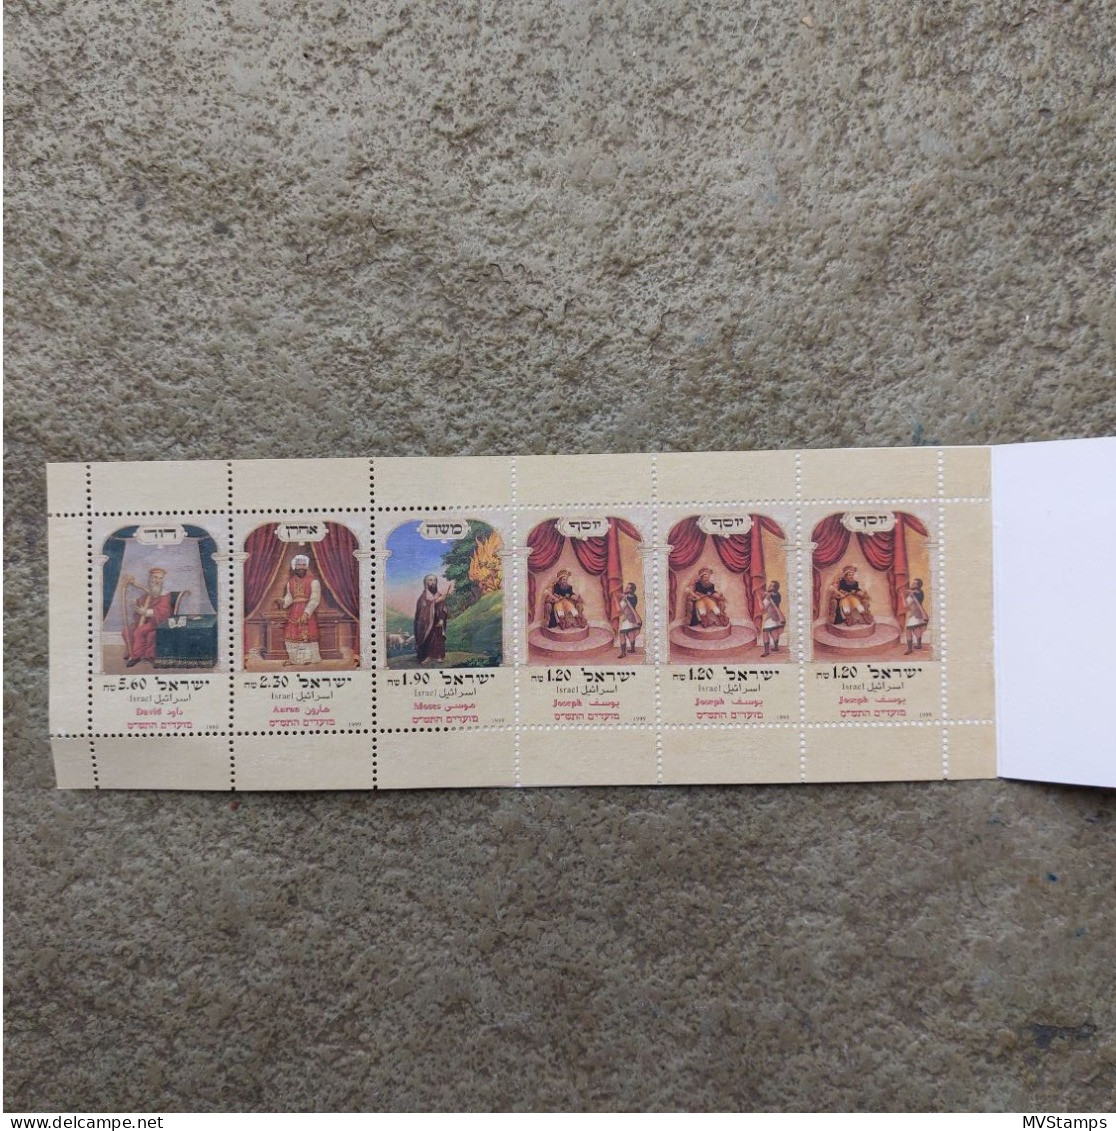 Israel 1999 Booklet Festival Stamps (Michel MH 34) Nice MNH - Carnets